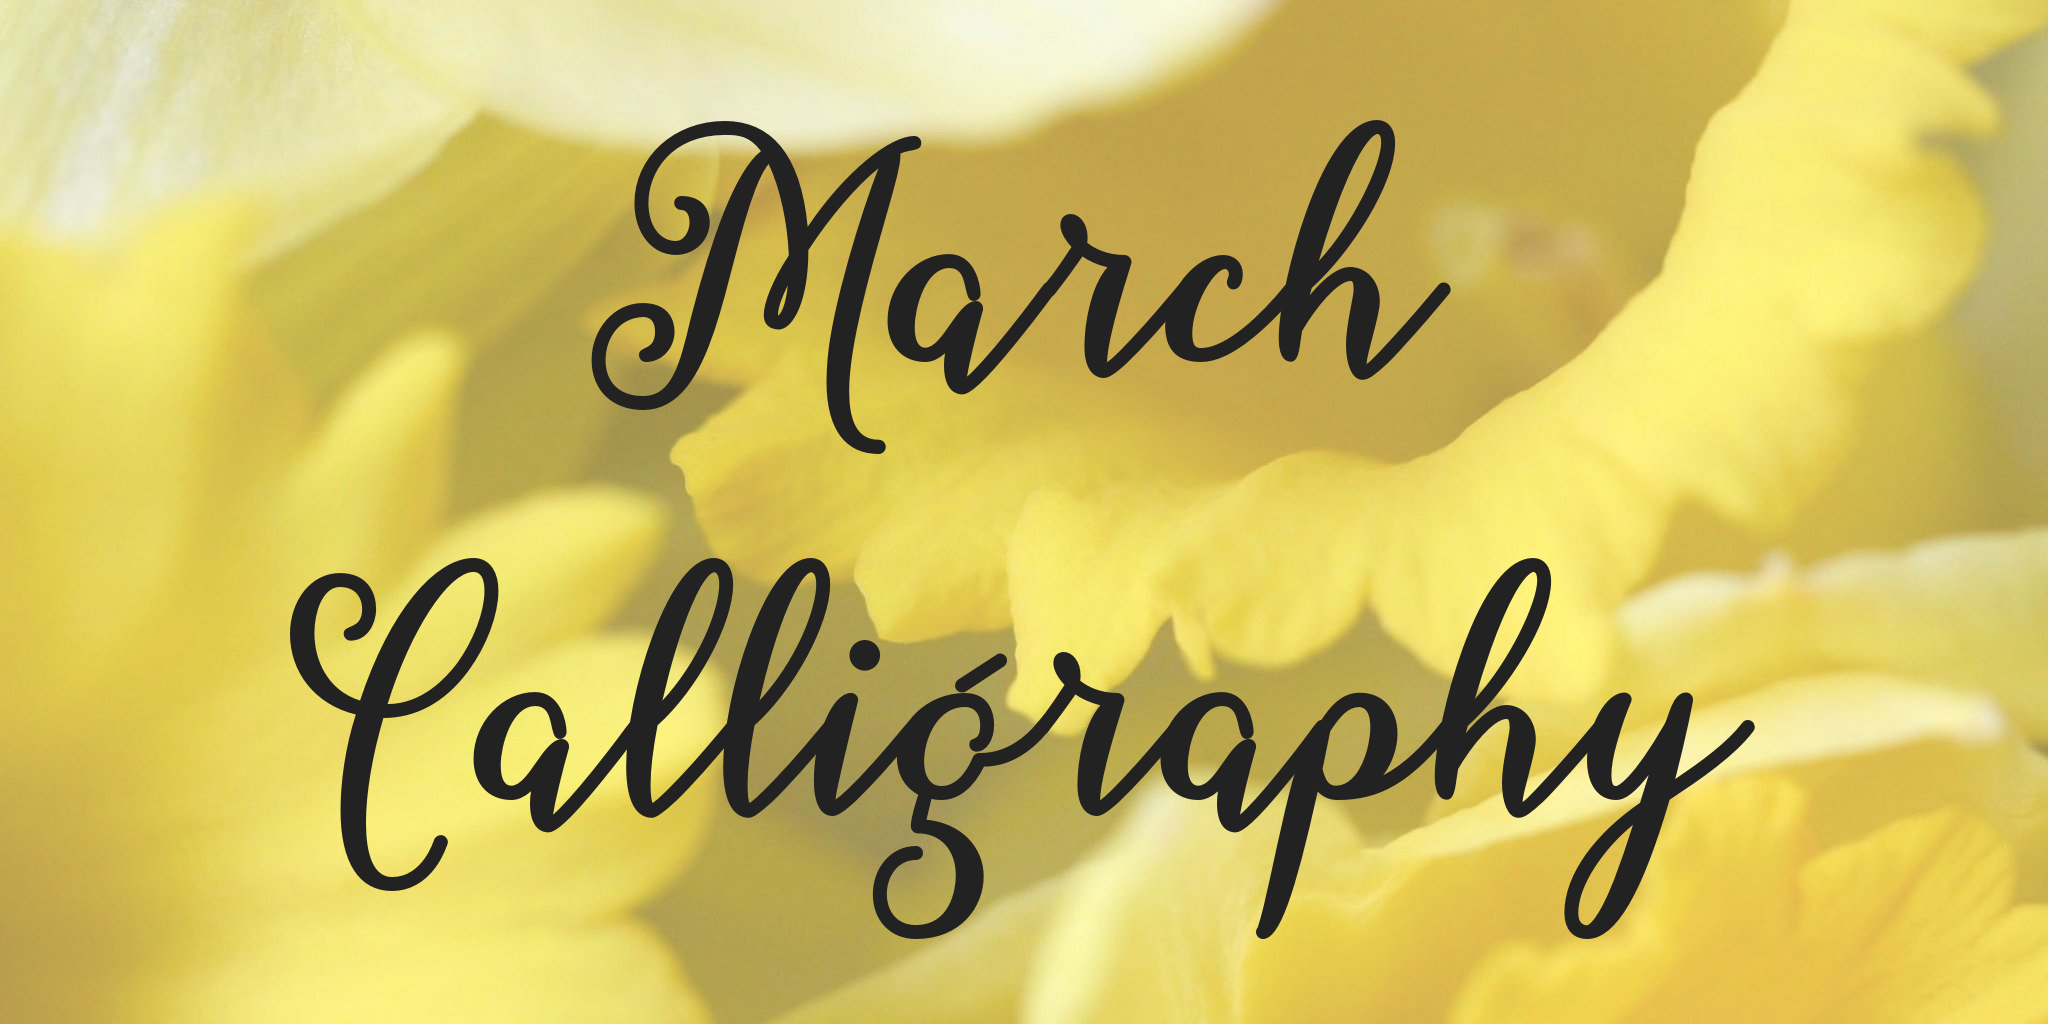 March Calligraphy